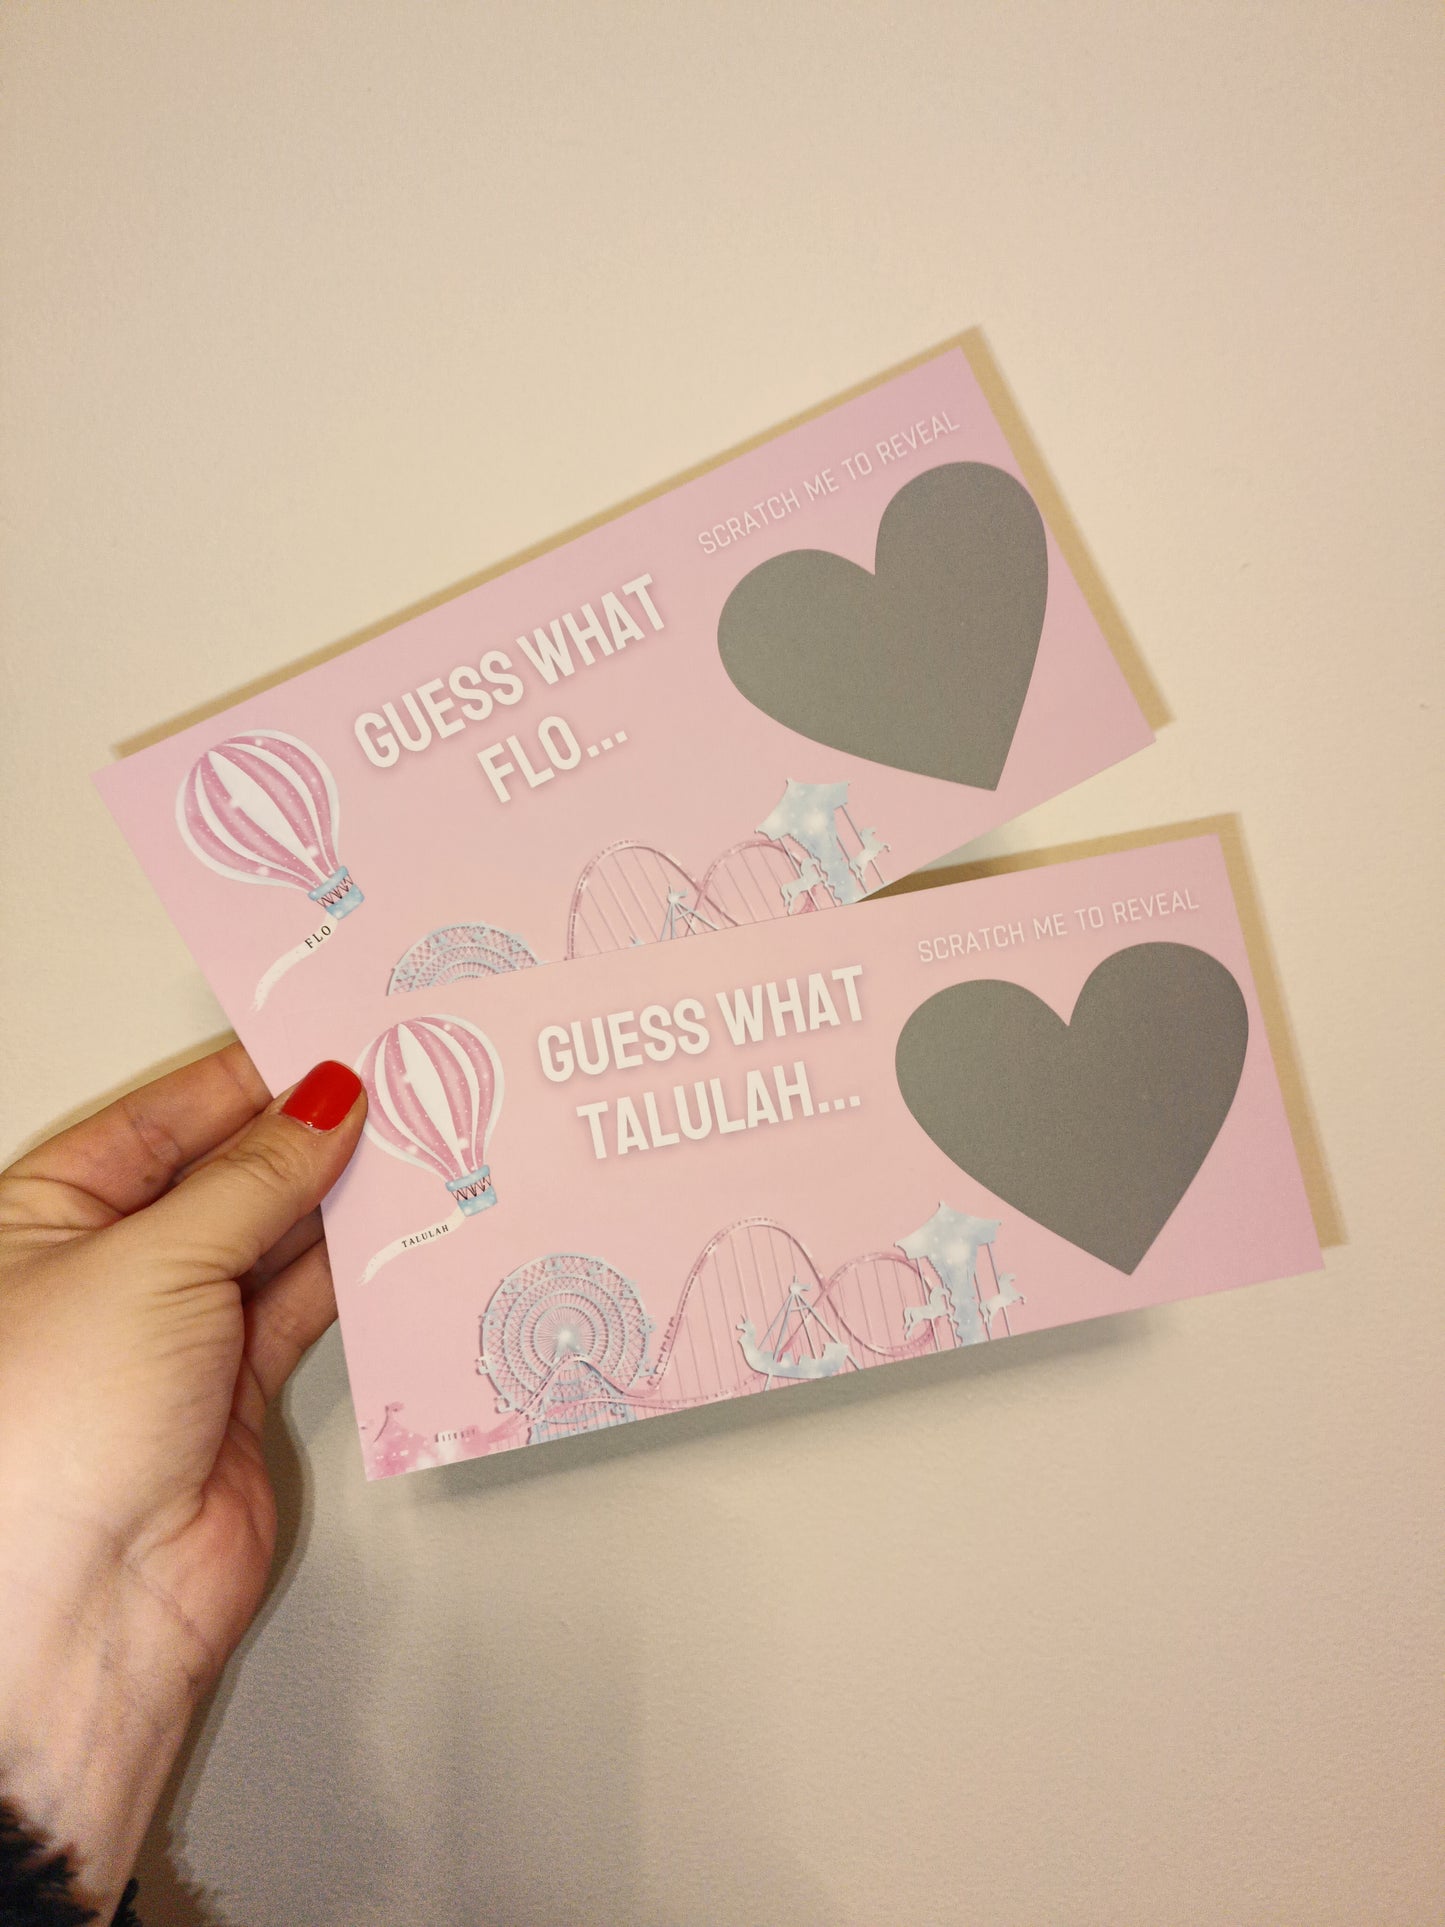 Surprise Ticket Print | Personalised Pink Theme Park Ticket Pass Voucher Membership | Scratch Reveal | Gift Idea